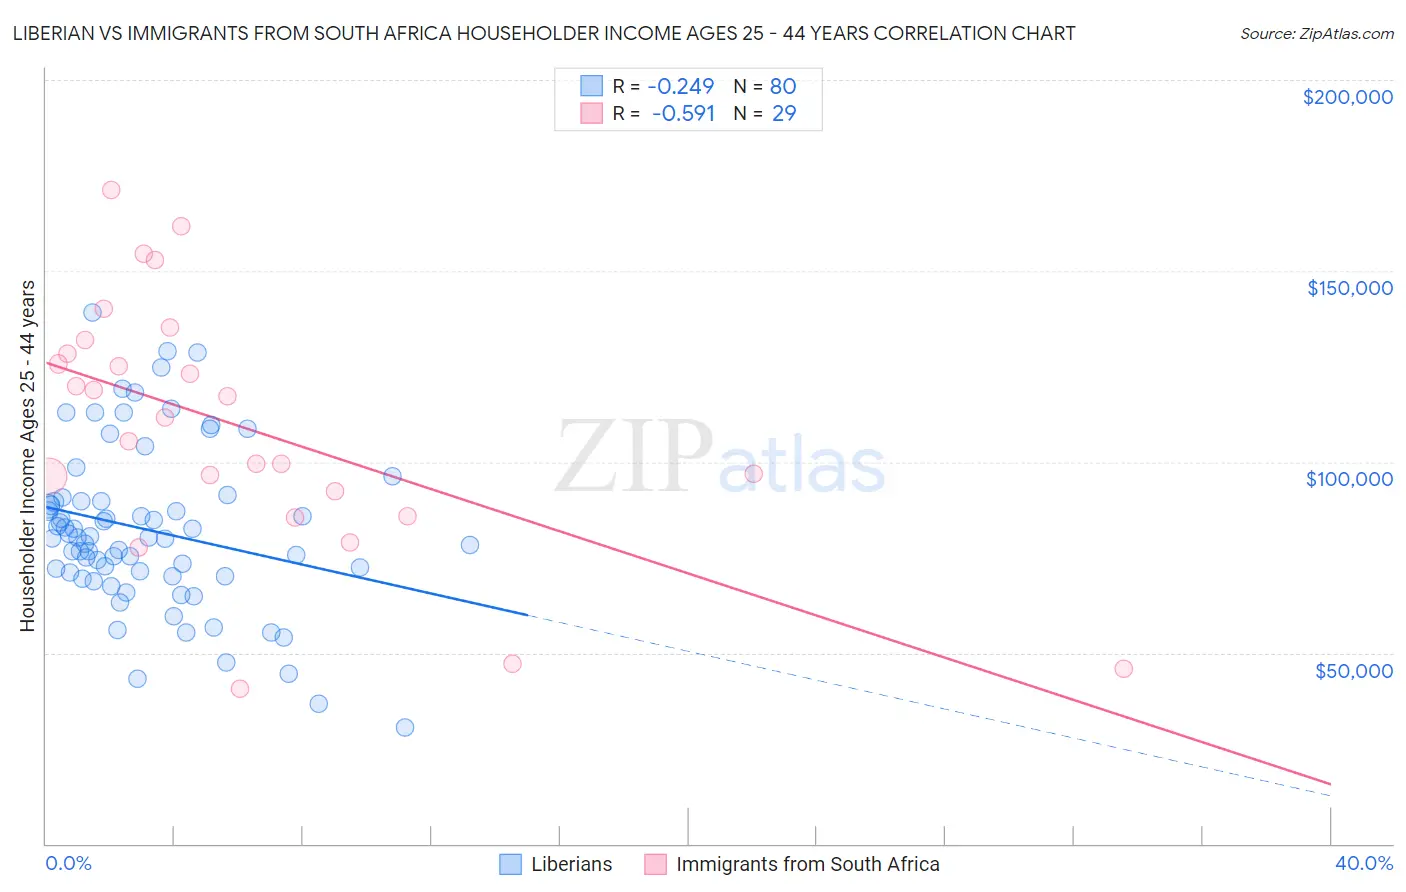 Liberian vs Immigrants from South Africa Householder Income Ages 25 - 44 years